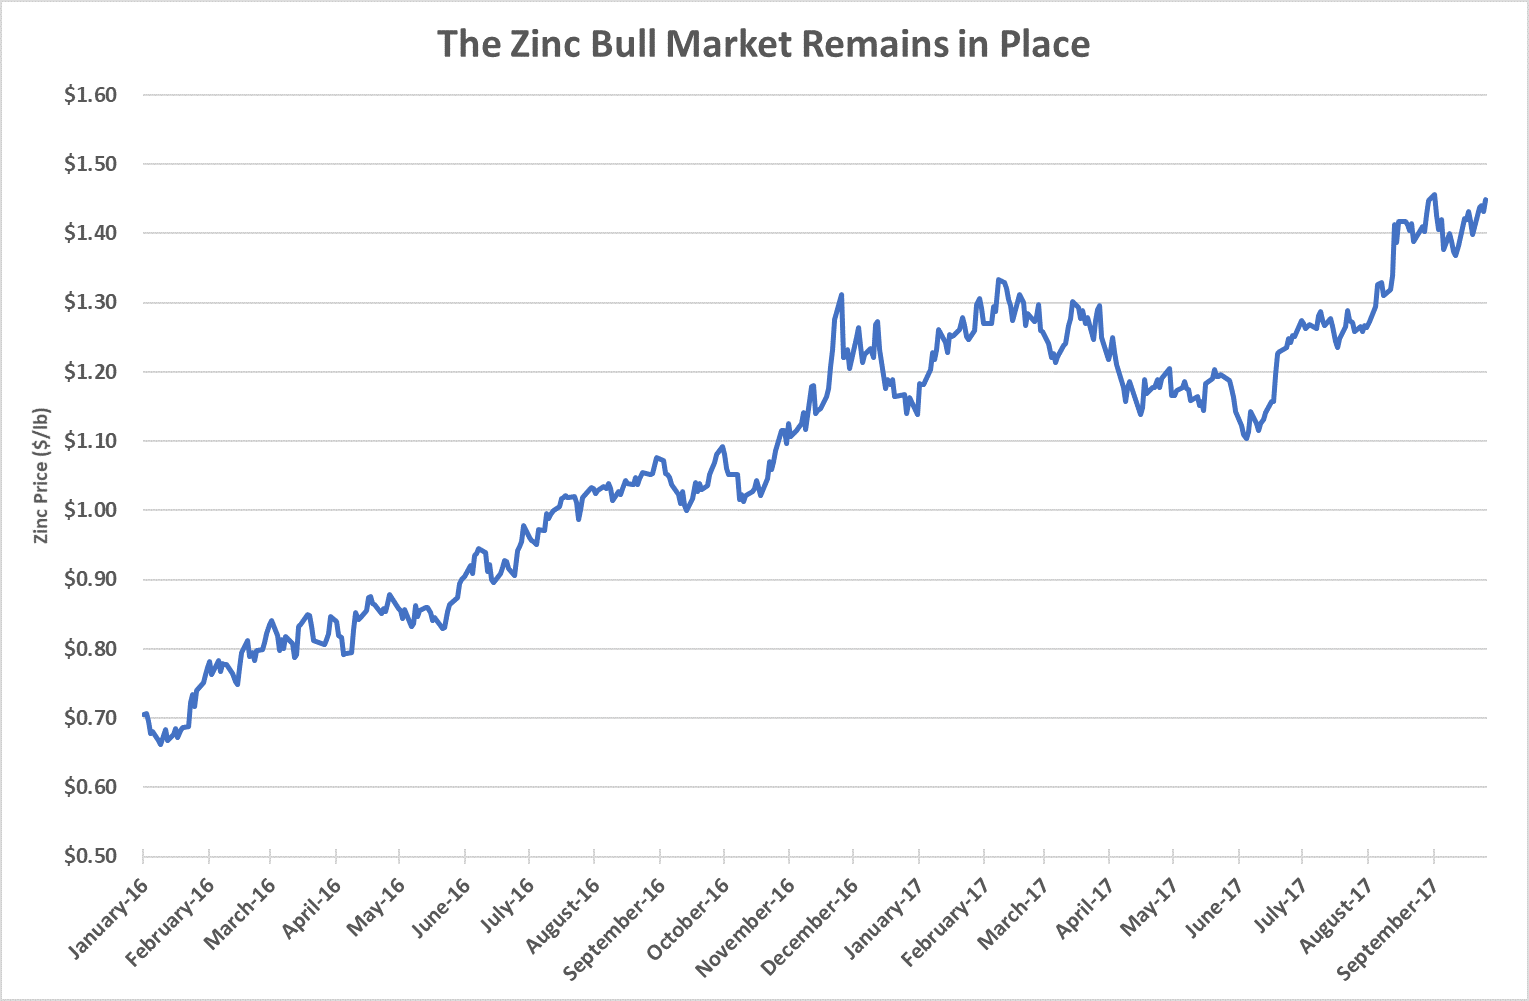 When a bull market comes to natural resources, it’s a constant source of worry. The truth is, no bull market goes straight up.